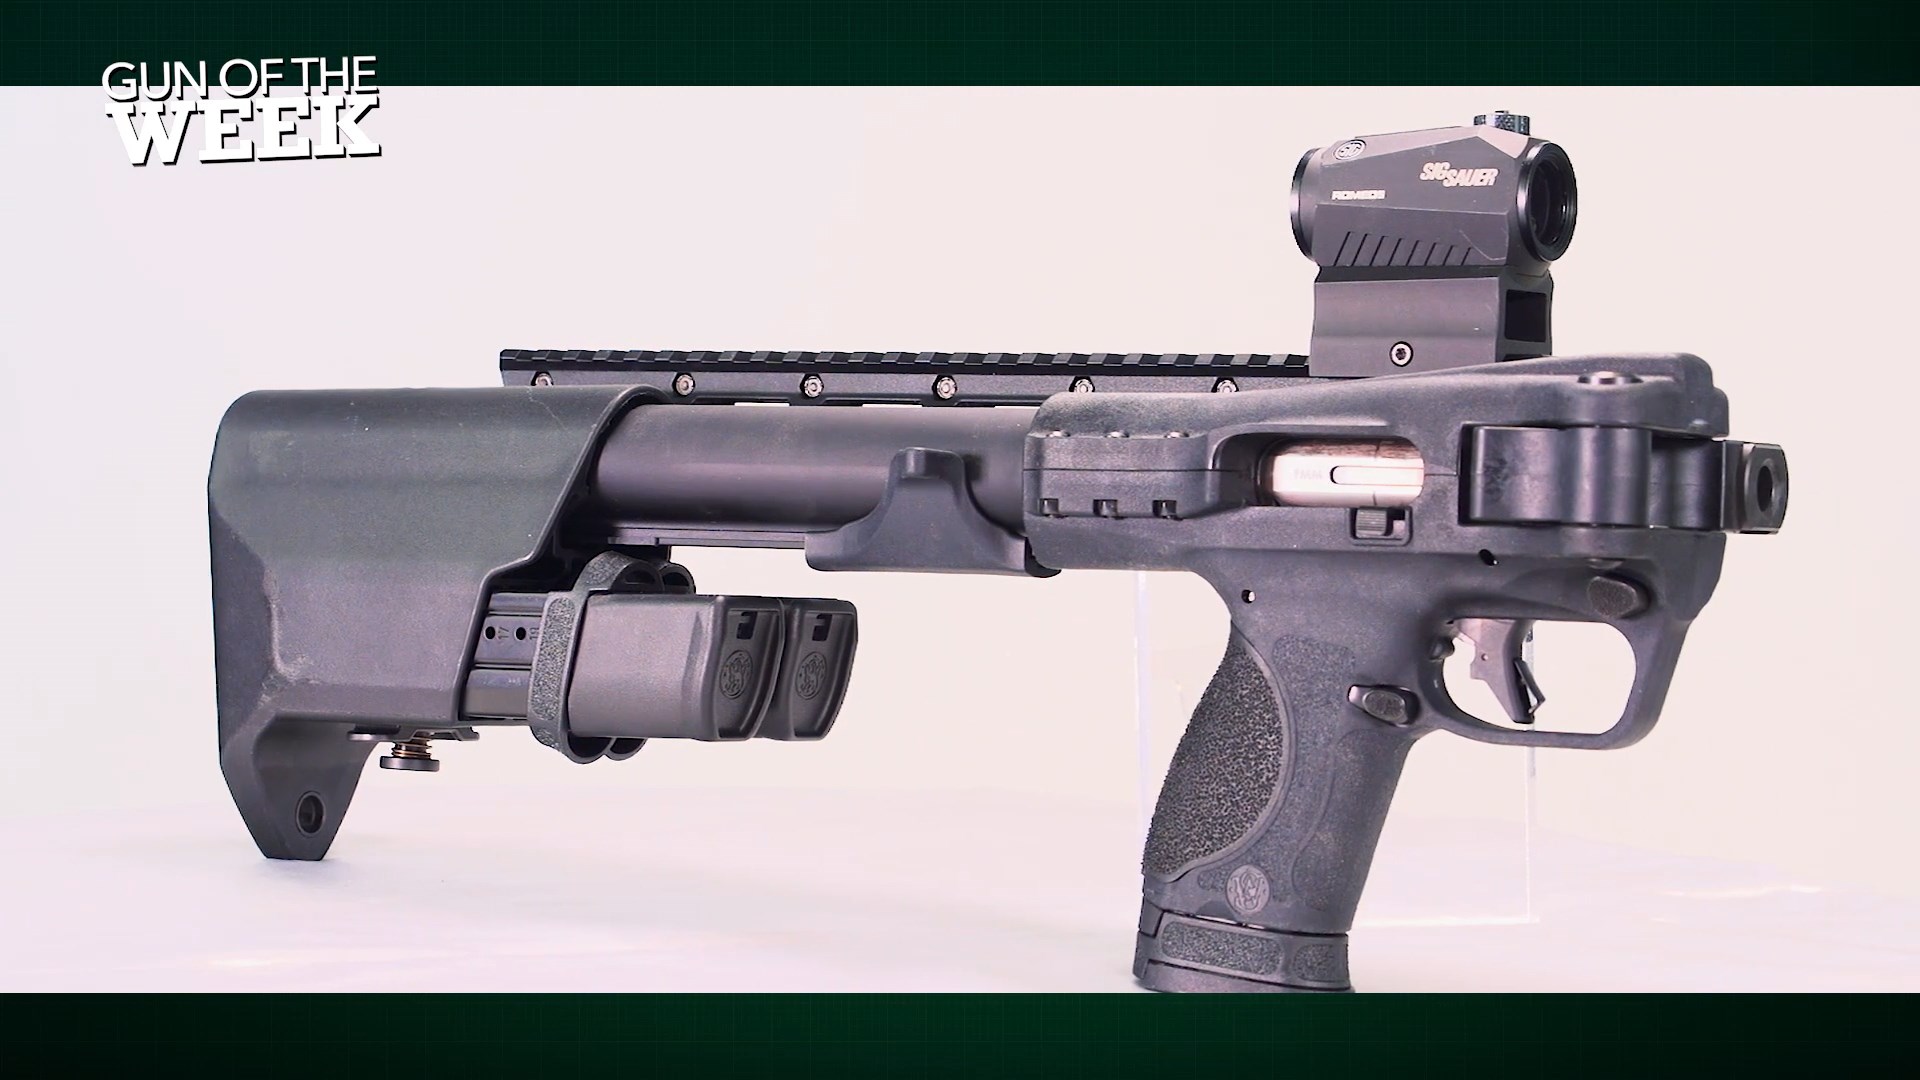 Smith & Wesson FPC pistol caliber carbine folded shown on white background with text on screen GUN OF THE WEEK